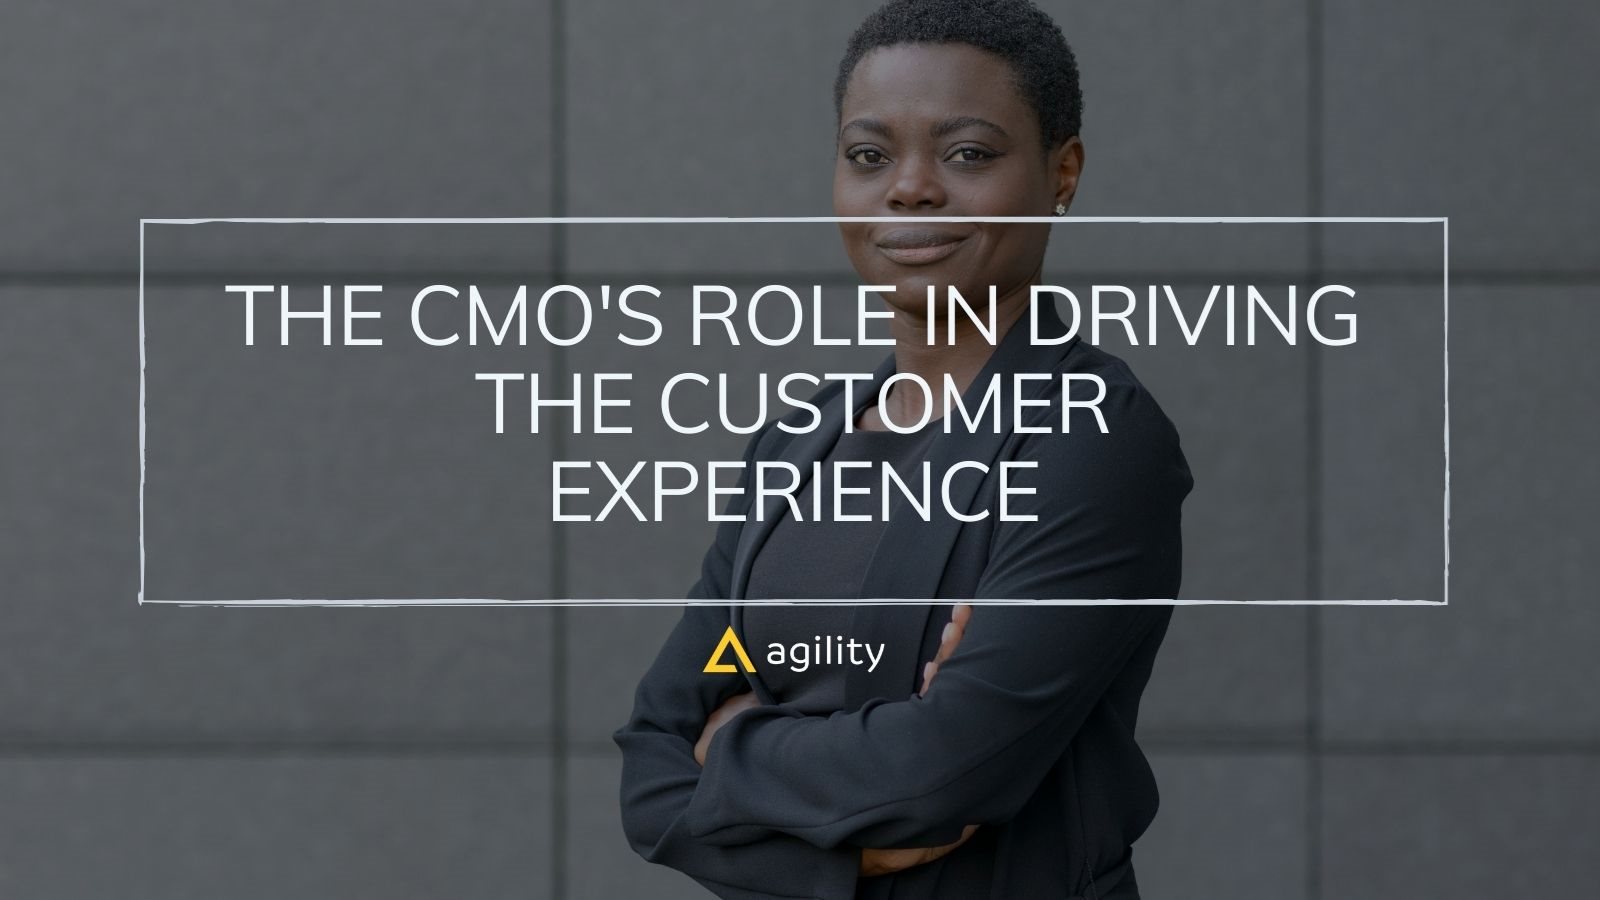 The CMO's Role In Driving the Customer Experience